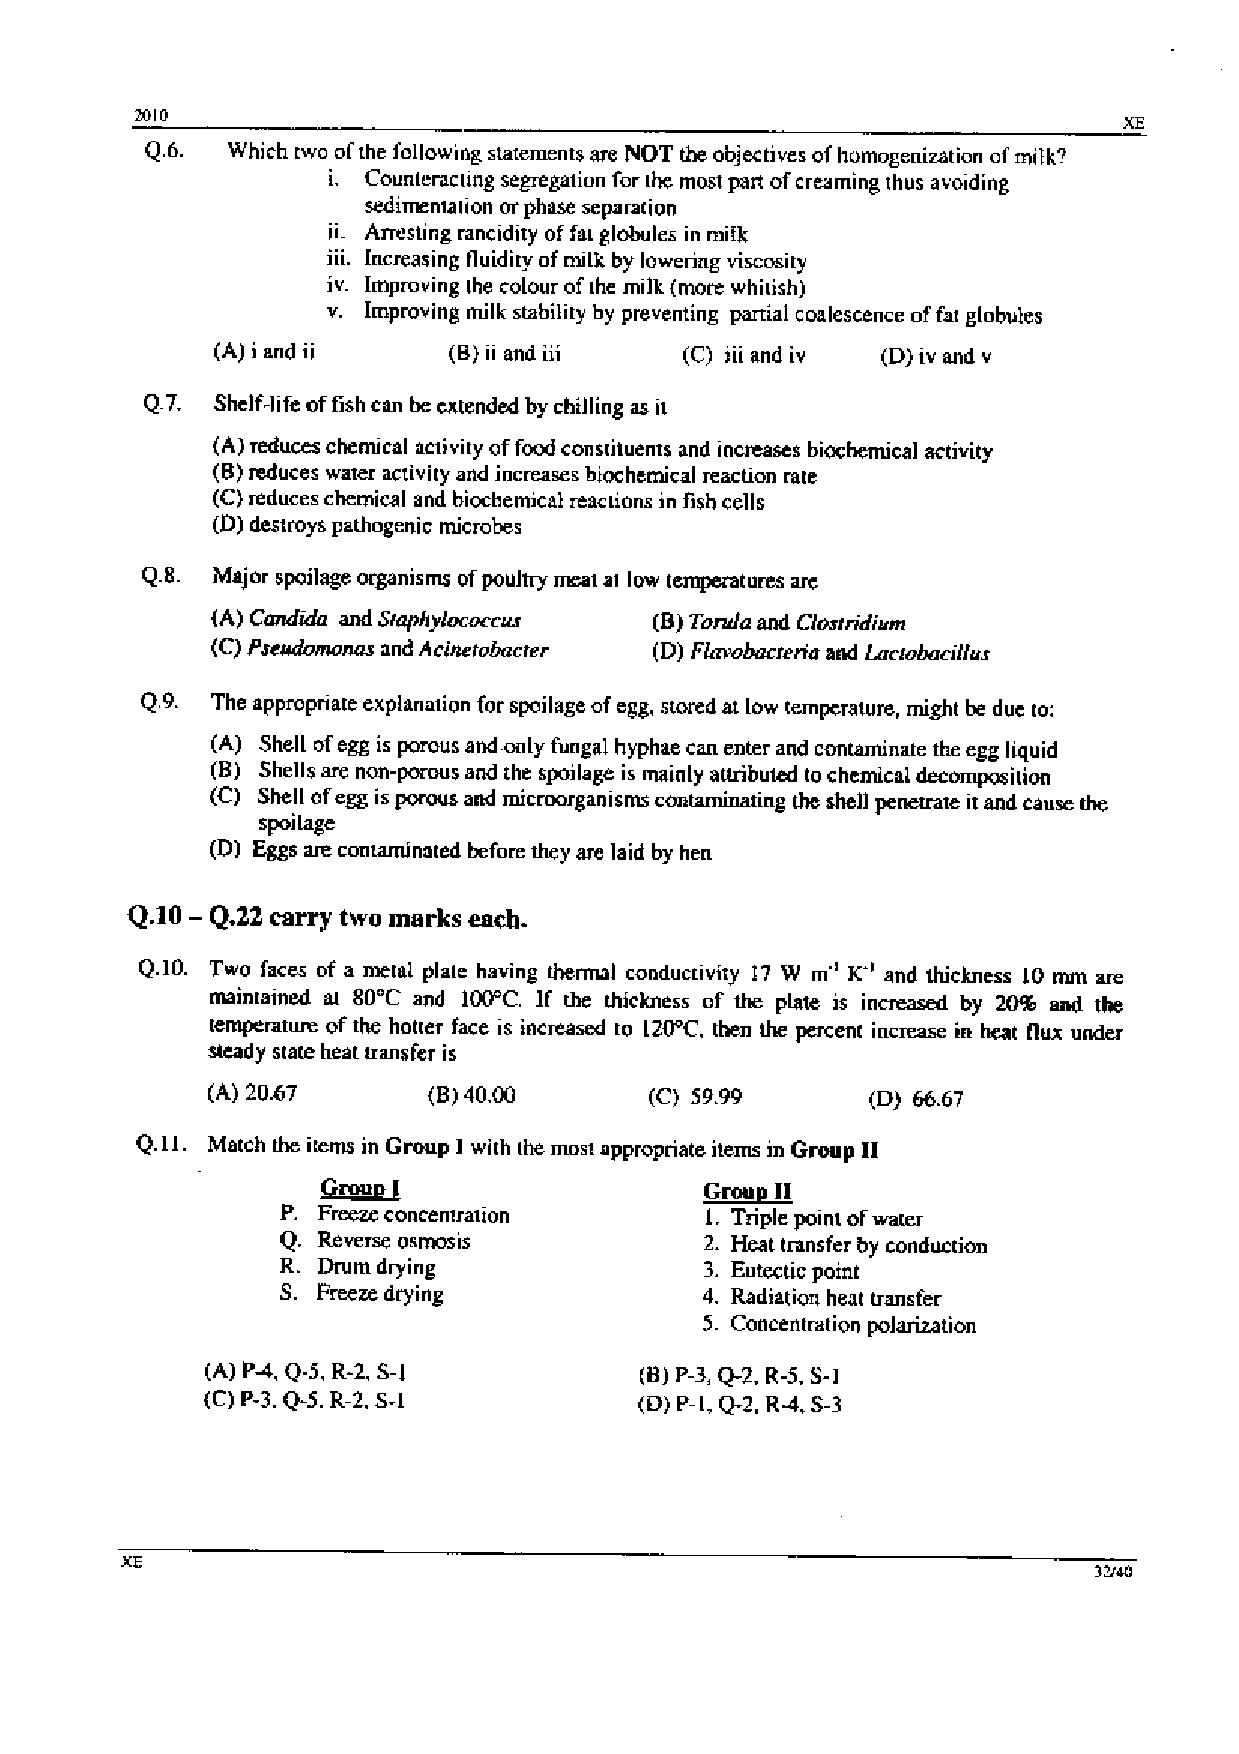 GATE Exam Question Paper 2010 Engineering Sciences 32